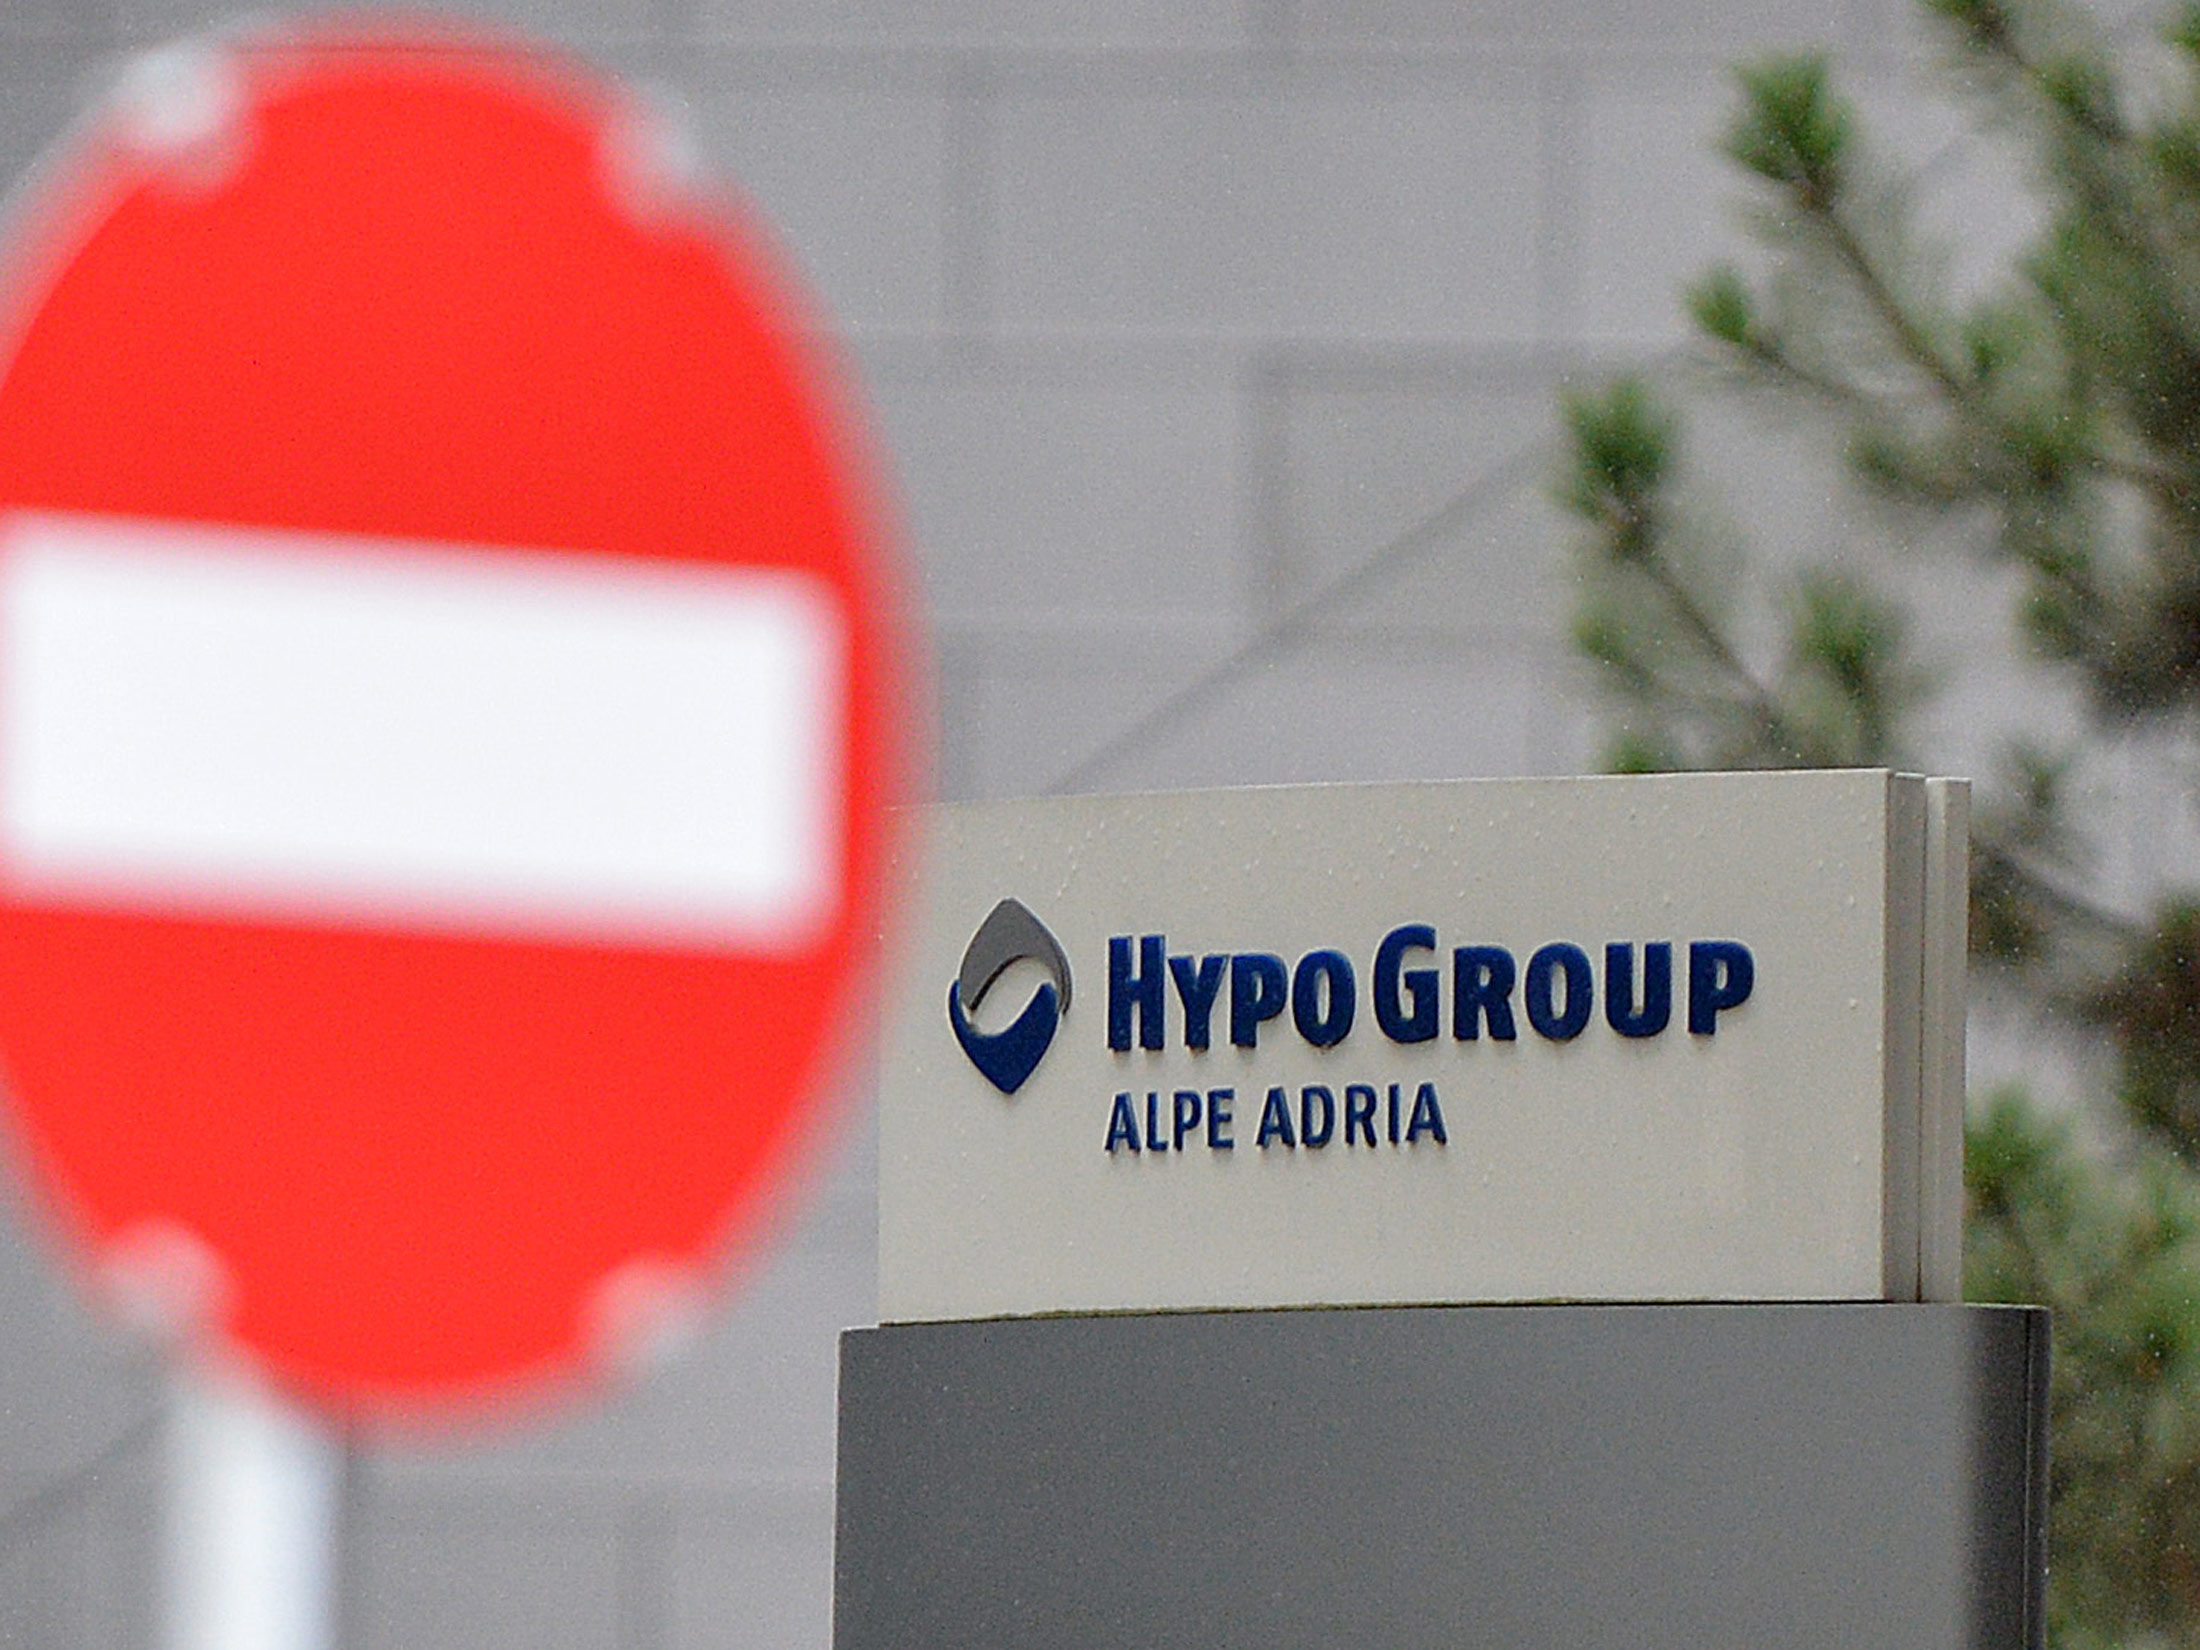 Austria is the first country to wind down a bank, Heta Asset Resolution AG, under the European Union’s new Bank Recovery and Resolution Directive after changing laws last year to allow it to write down subordinated debt of its failed predecessor, Hypo Alpe-Adria-Bank International AG.
